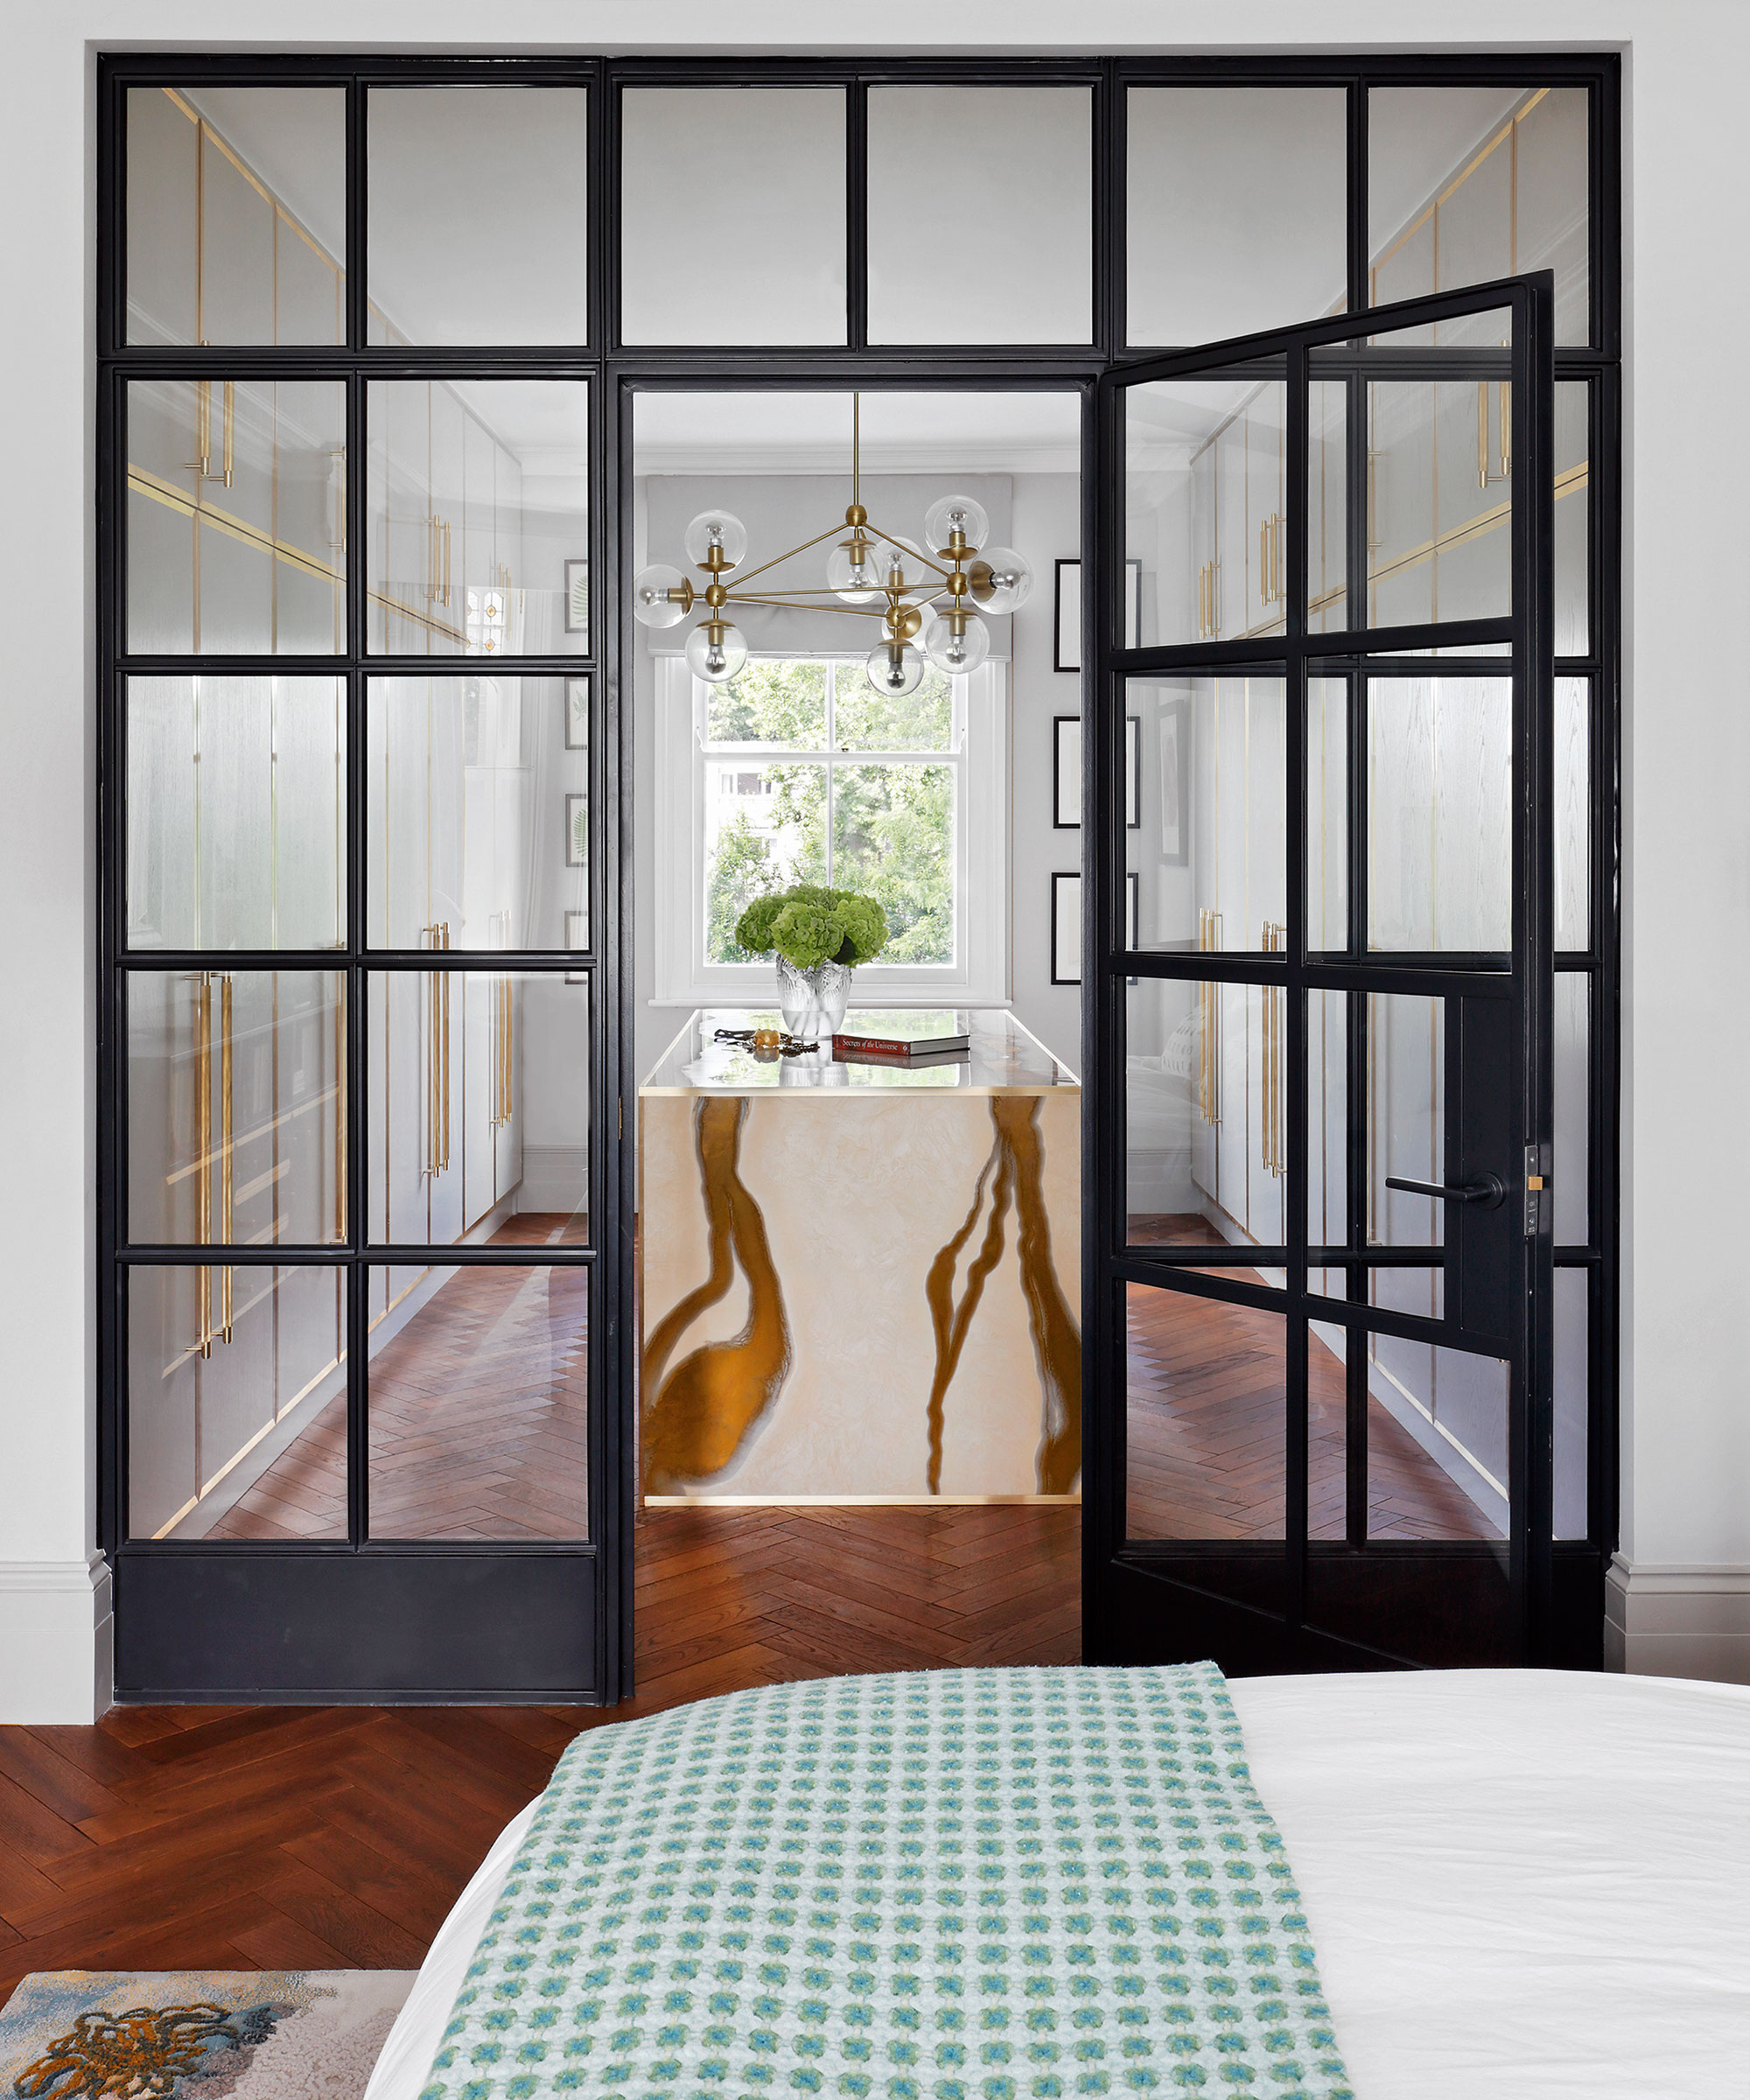 Walk-in closet ideas with a walk-in wardrobe separated from the main bedroom by glass crittall-style doors, with wooden flooring and a chandelier.